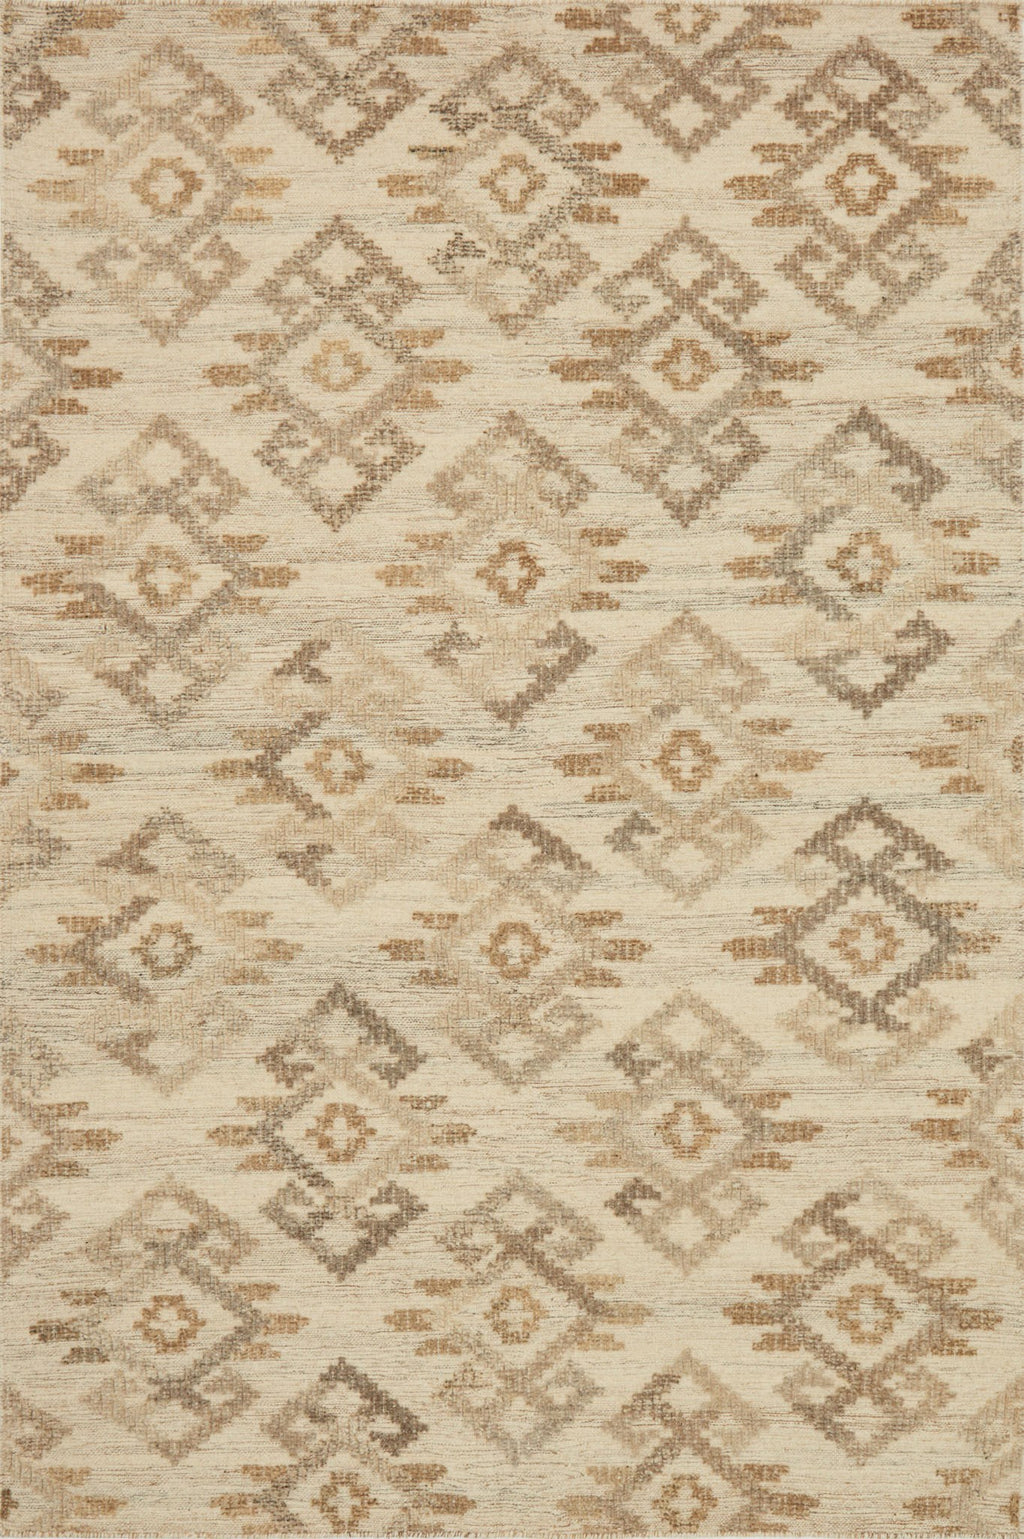 AKINA Collection Wool Rug  in  IVORY / BEIGE Ivory Small Hand-Woven Wool